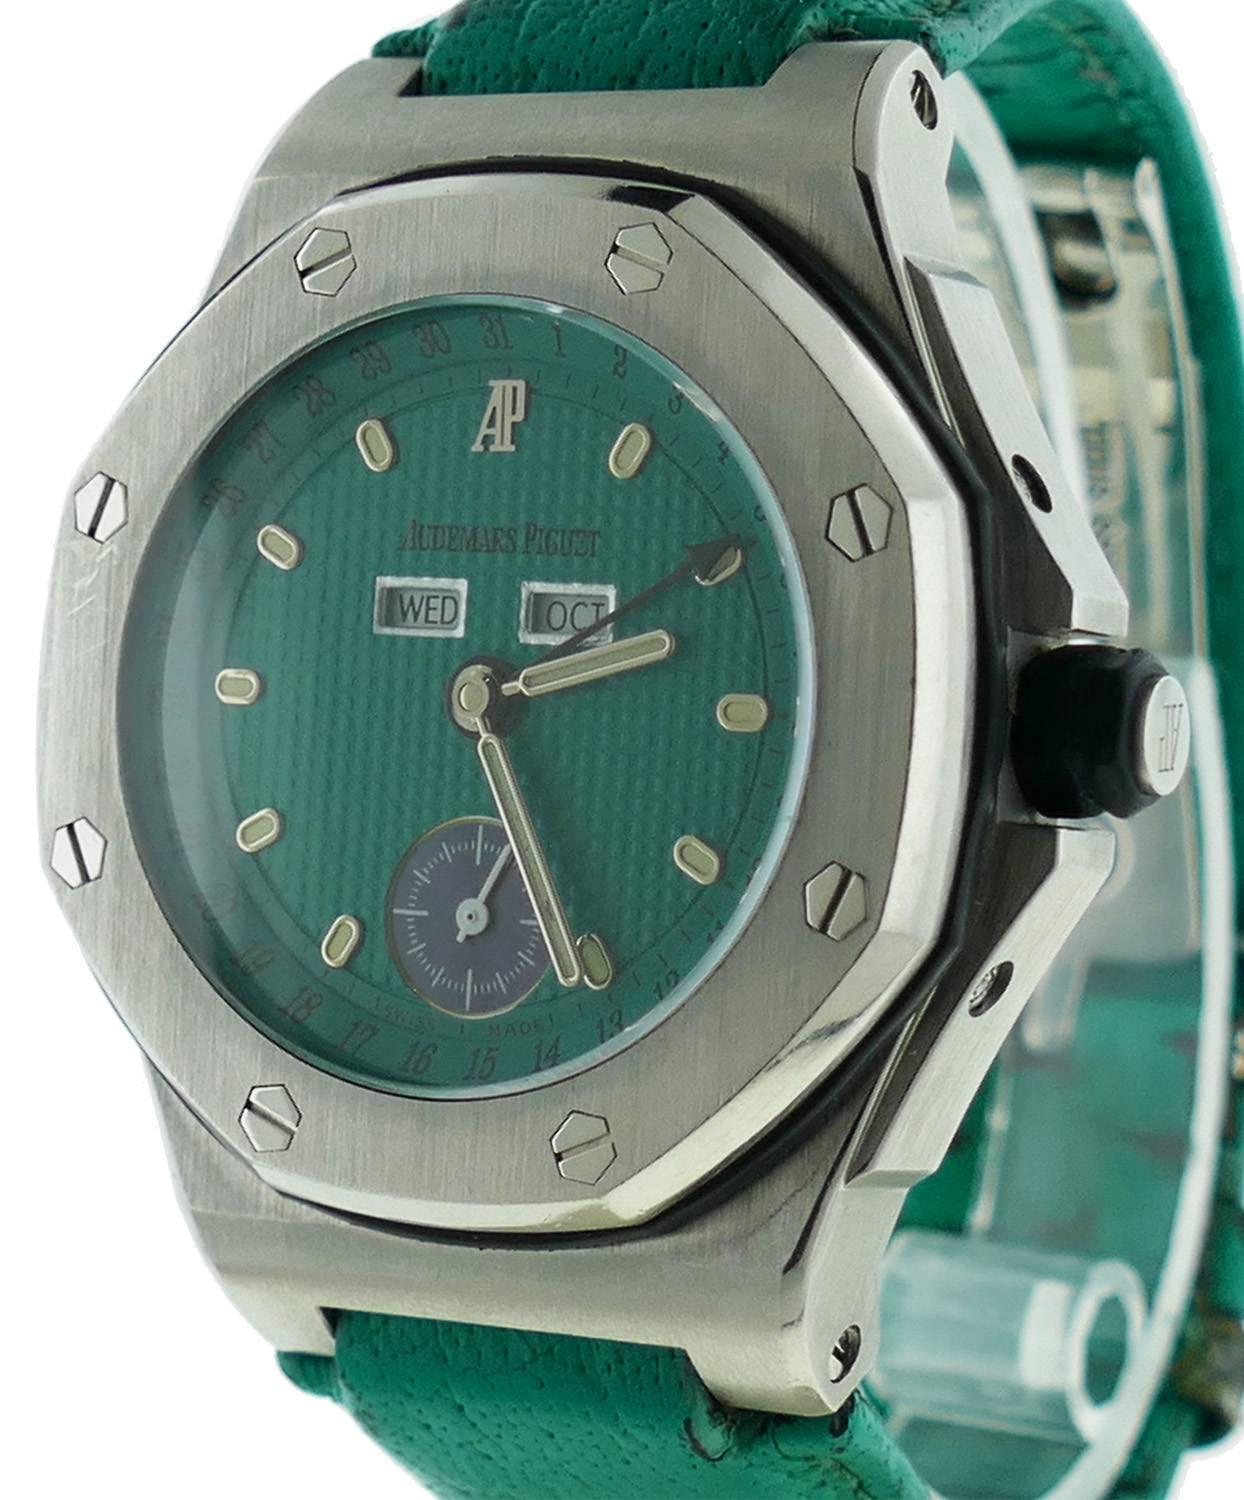 Mens (40mm) Audemars Piguet Royal Oak OffShore Triple Date Green Dial Watch. The Watch is in Good Condition. and Functioning Perfectly; Movement is Powered by Automatic Mechanical Winding. The Watch is on a AP Strap ( Some Wear) & Deployment Buckle.